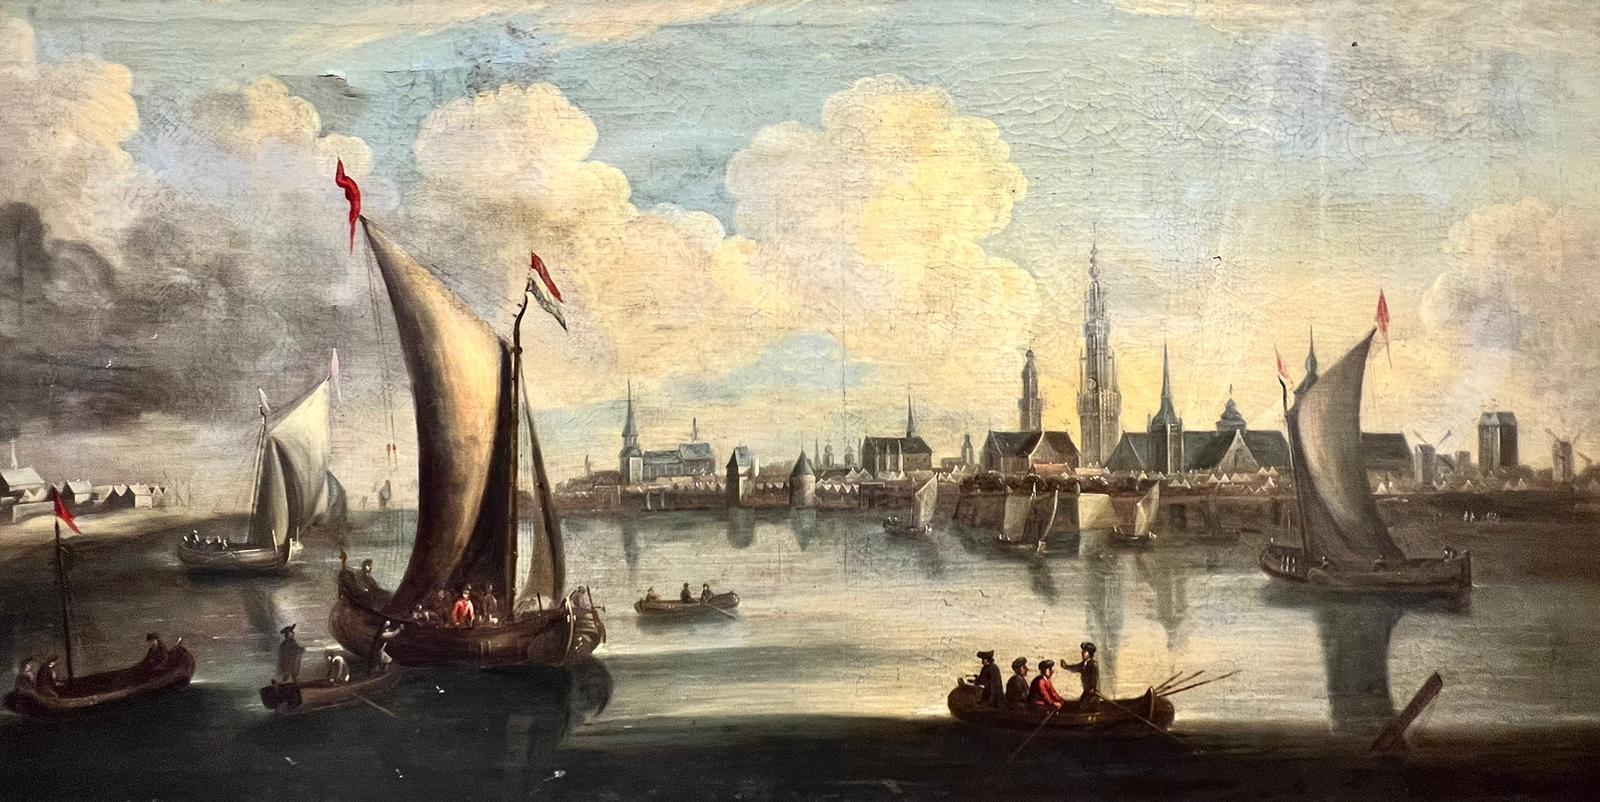 The Trading Port
Dutch School, early 18th century
oil painting on canvas, framed
framed: 27.5 x 50.5 inches
canvas: 24.5 x 47 inches
provenance: private collection, UK
condition: the painting is sound but does have some dents, minor punctures and